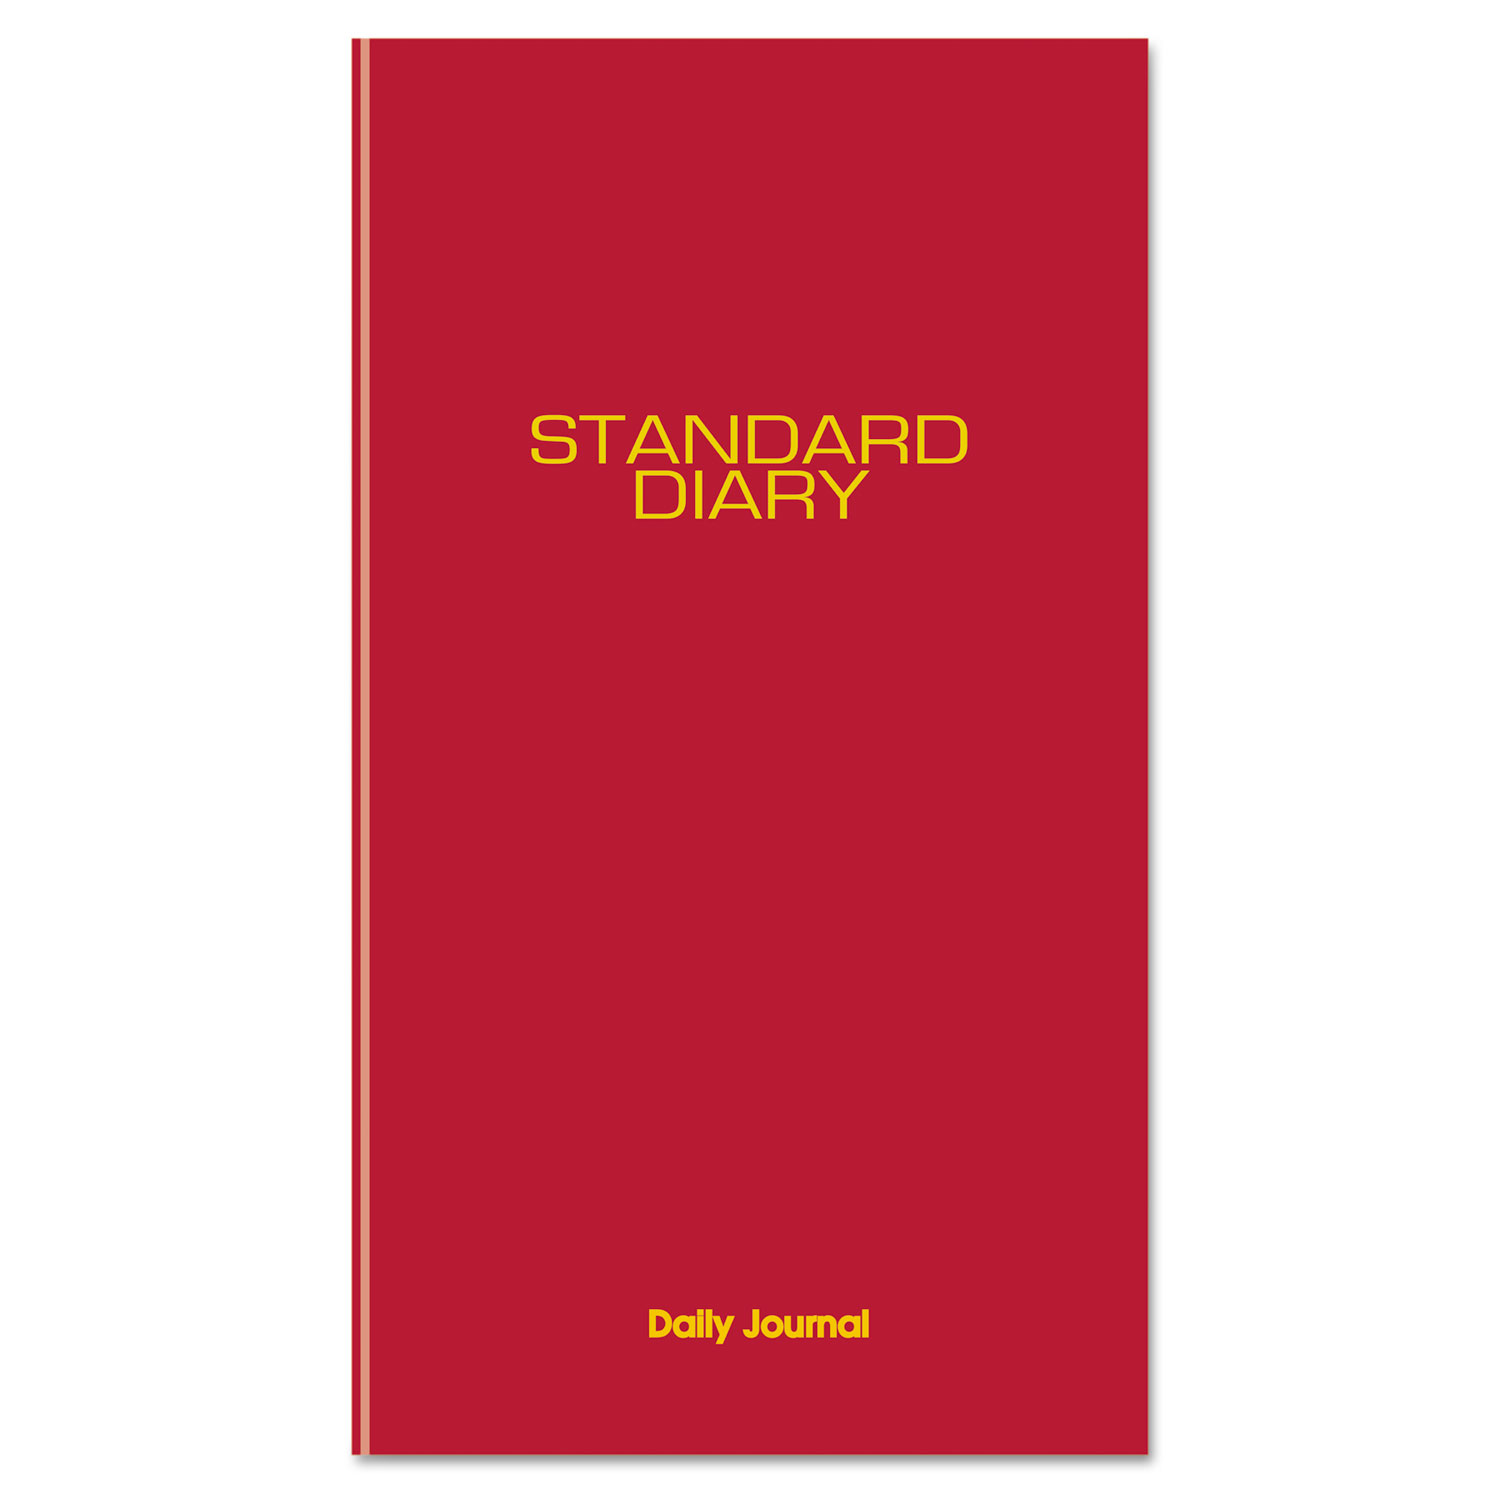 Standard Diary Recycled Daily Journal, Red, 7 11/16 x 12 1/8, 2018